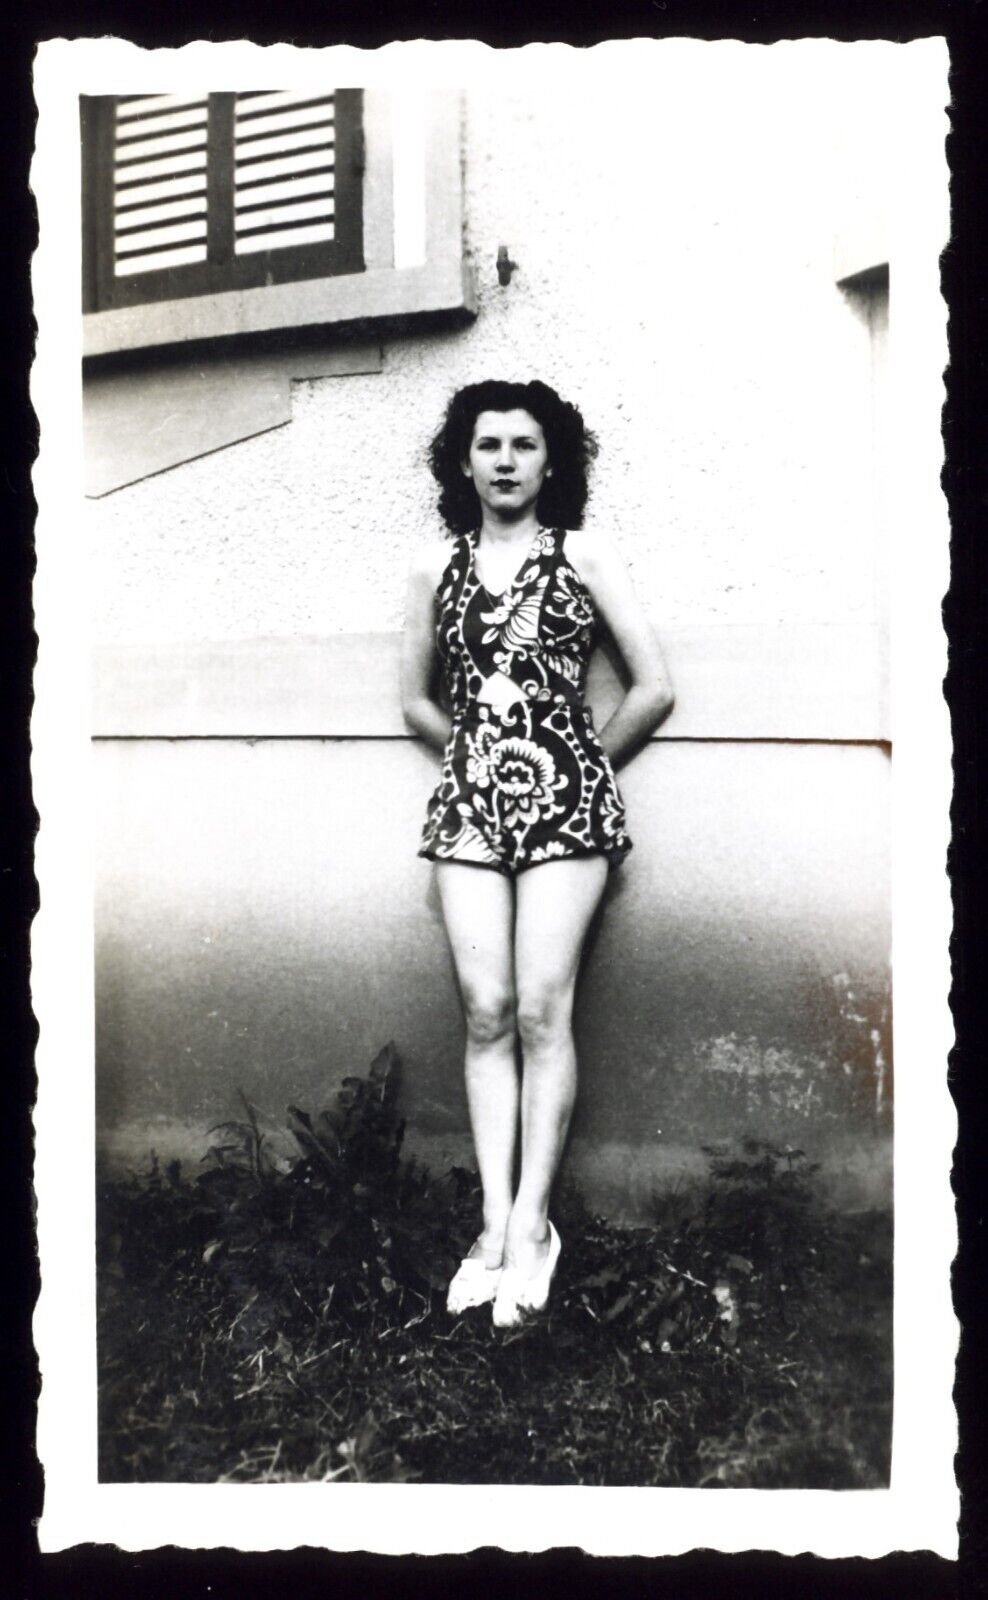 Vintage PRETTY FLAPPER Snapshot Photo 1930s BATHING SUIT POSE Free US Shipping